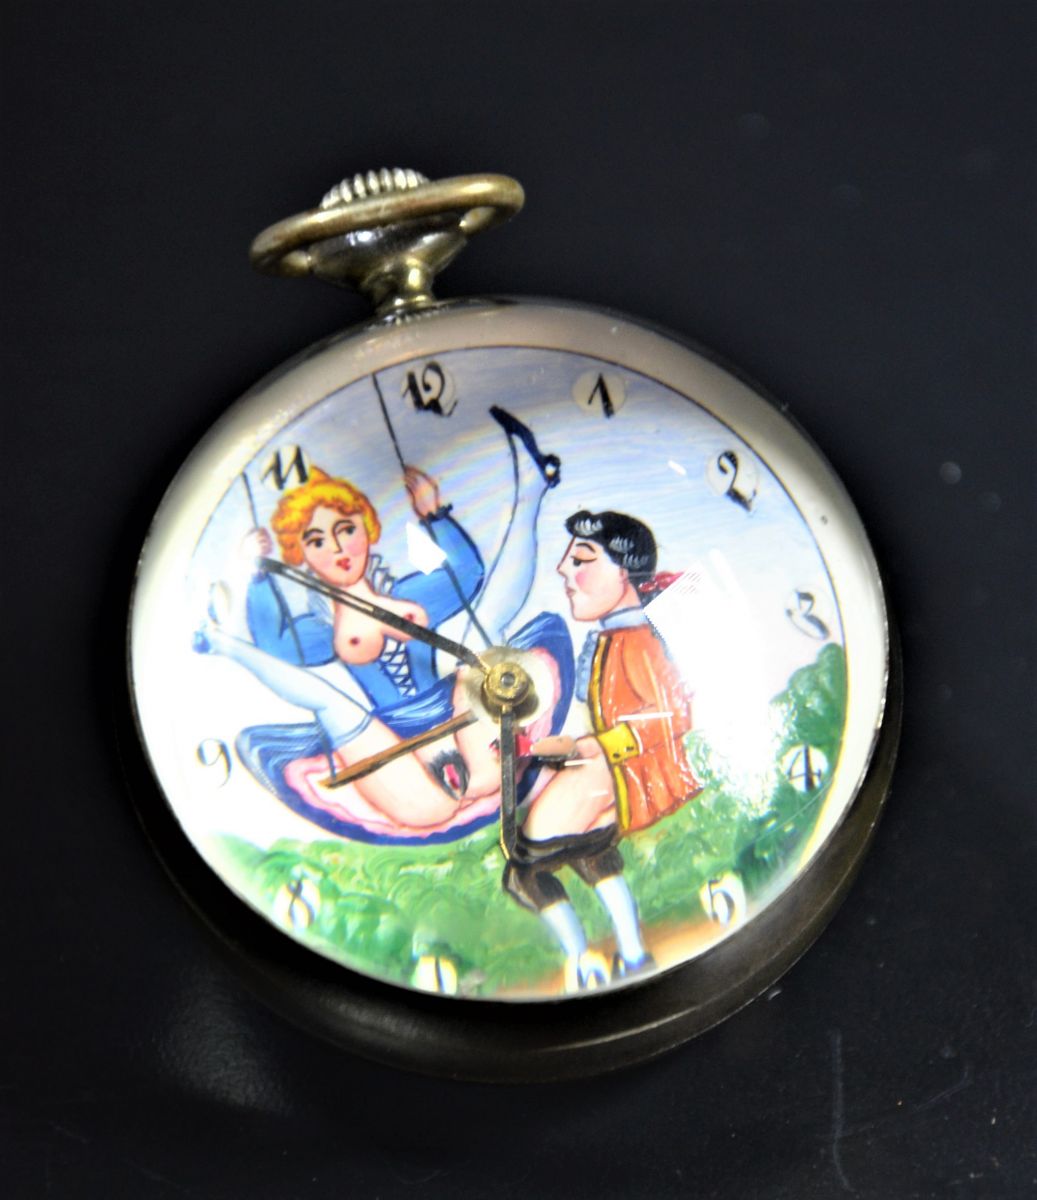 Spherical clock with erotic scene, signed Marvin. The clock face is painted. Very good condition.